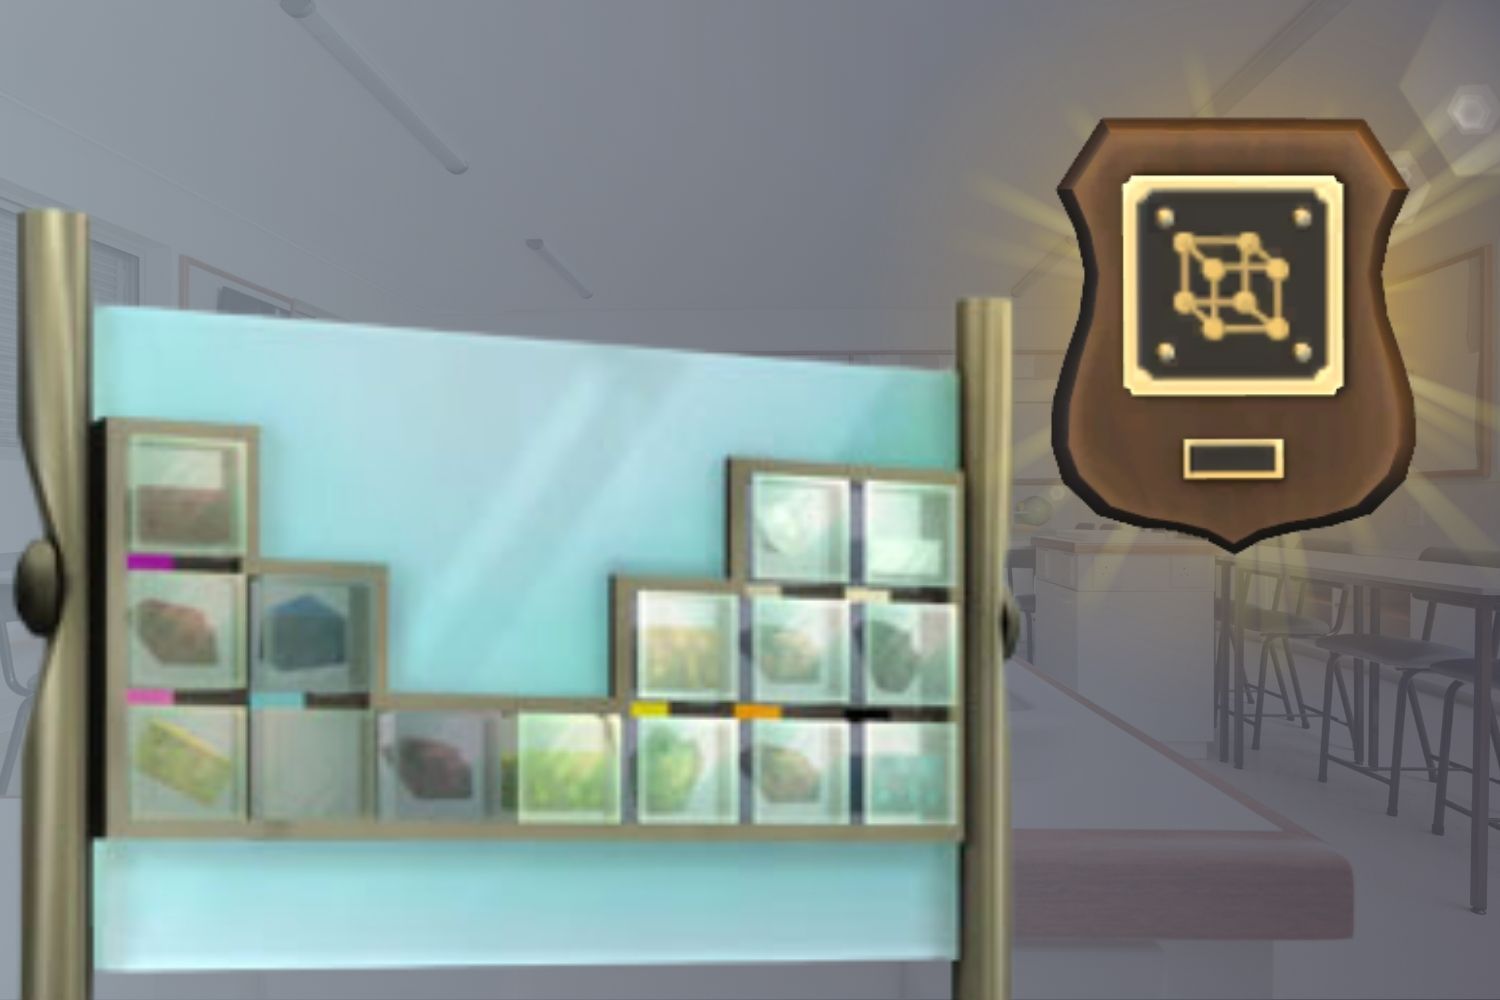 A completed elements collection is displayed in the Elemental Display Case alongside an It's All Elementary Plaque